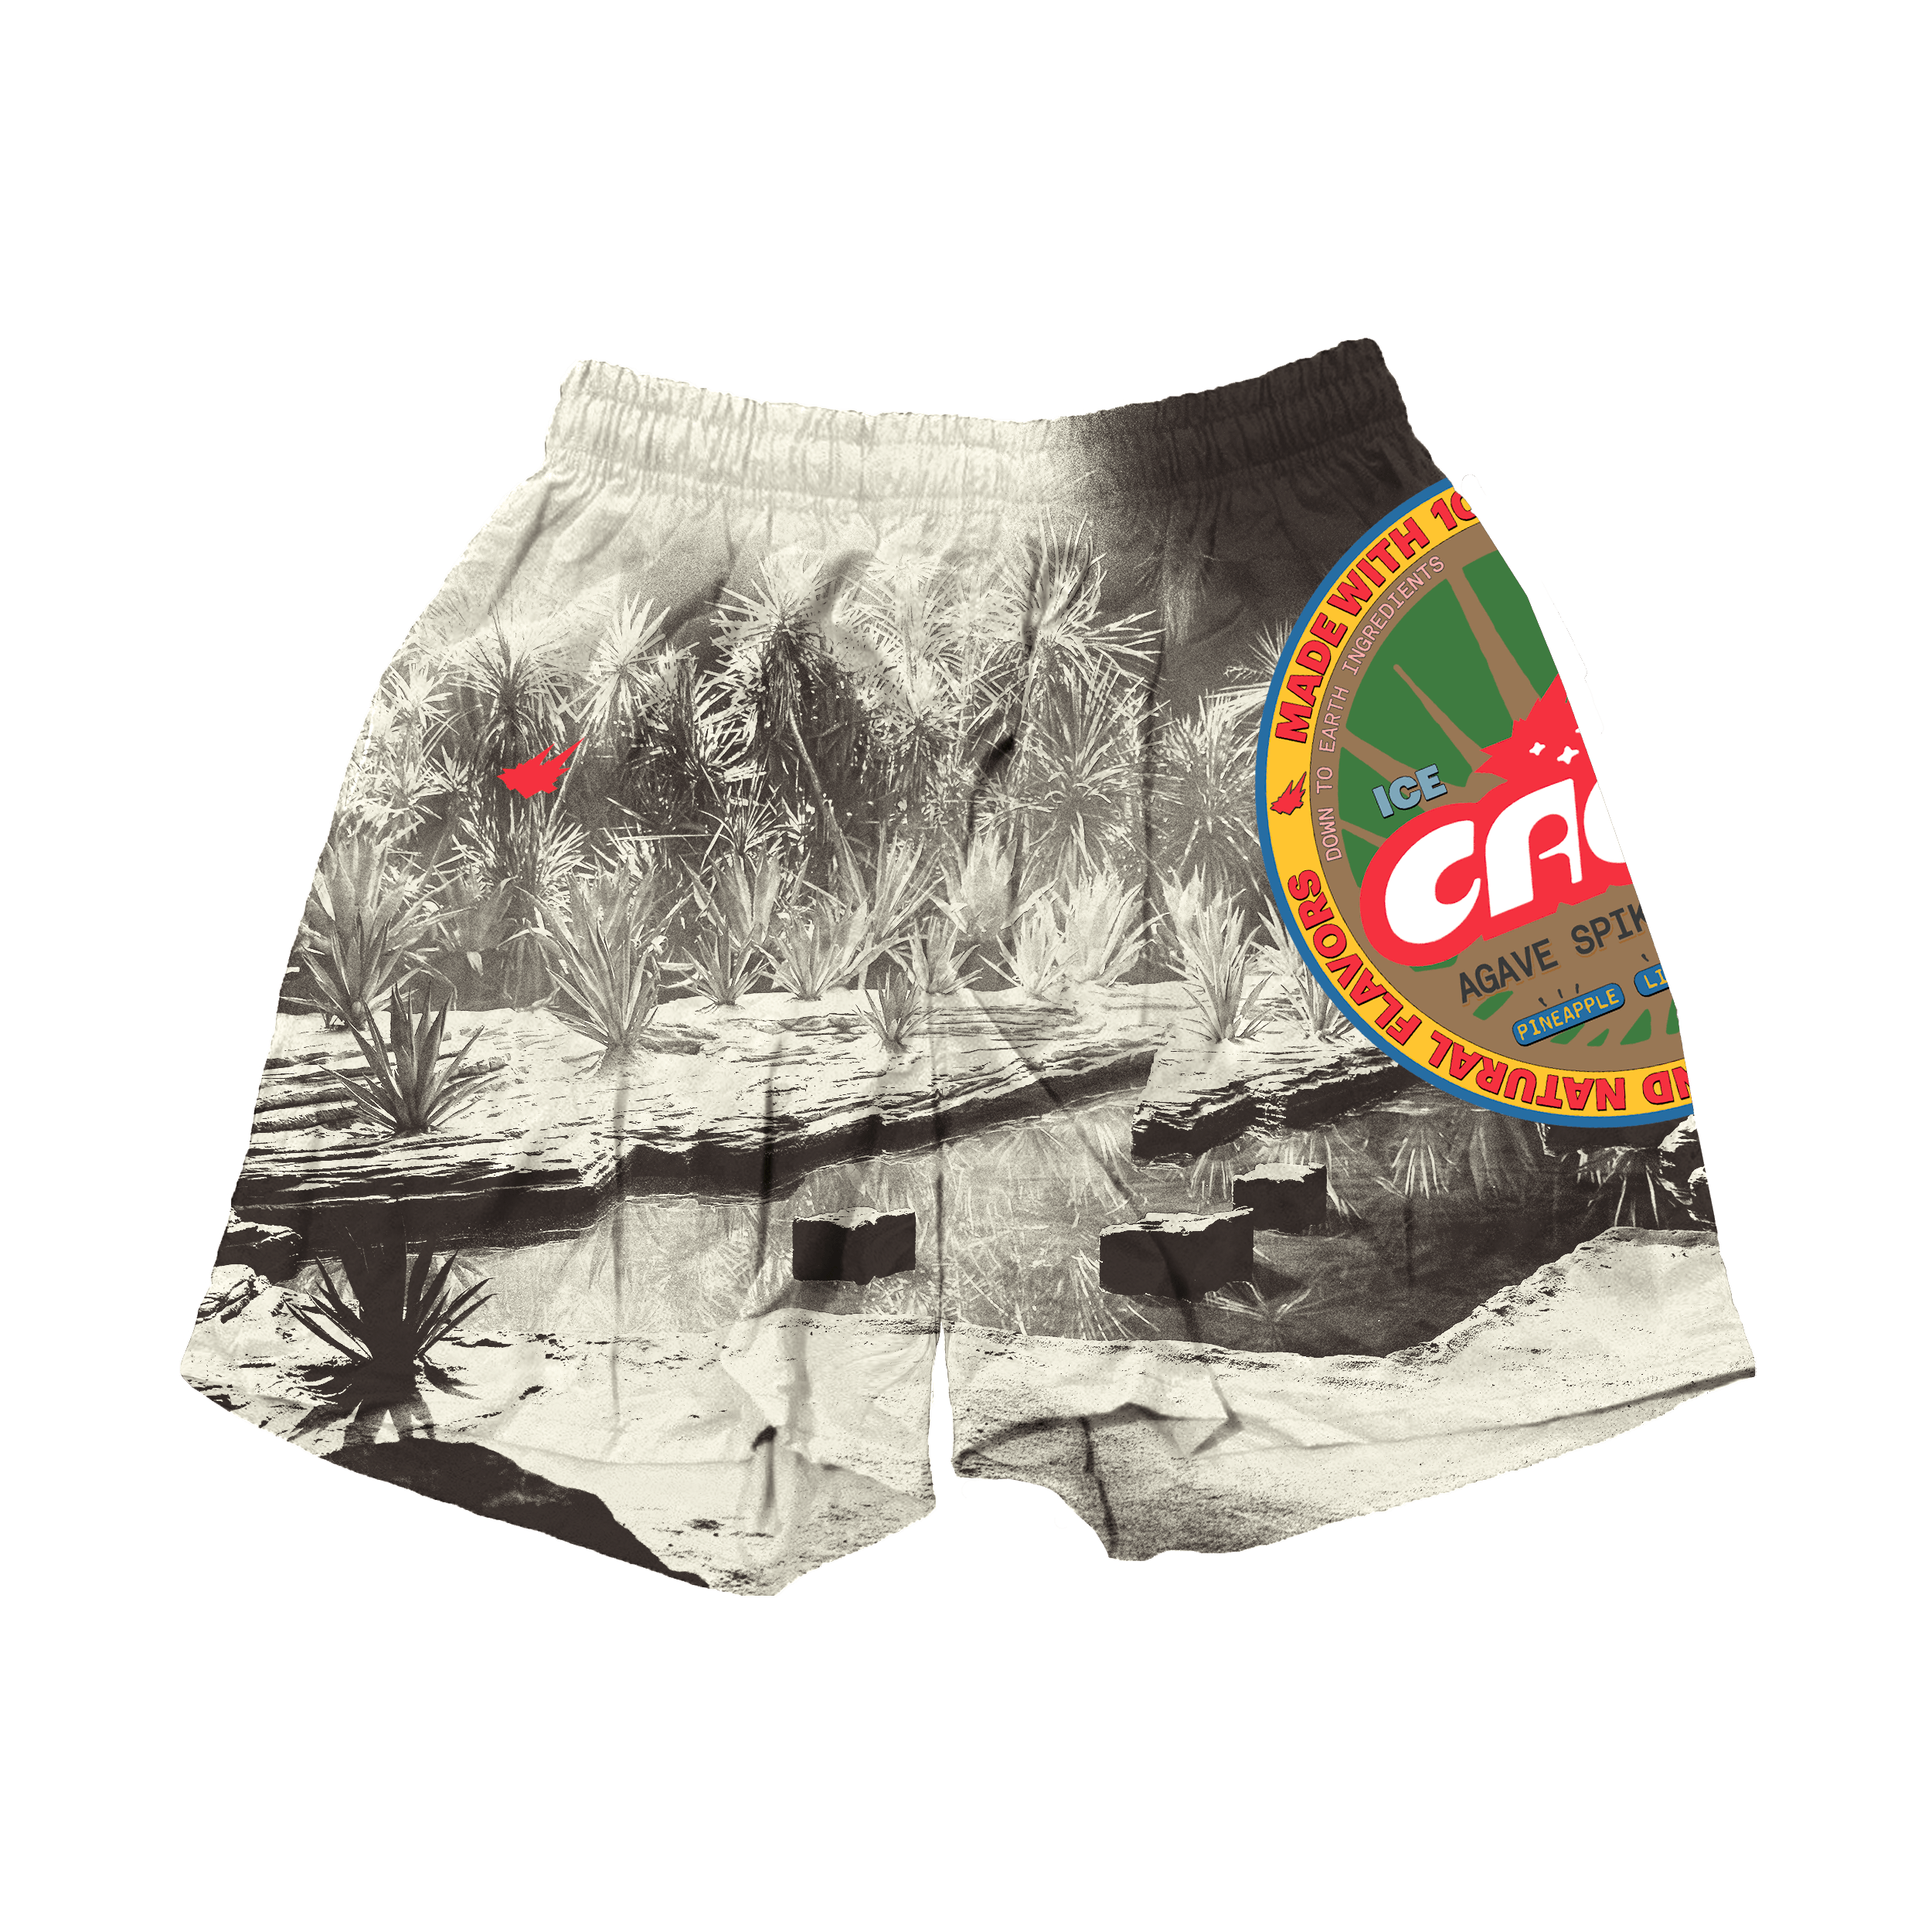 CACTI OASIS OUTDOOR SHORTS